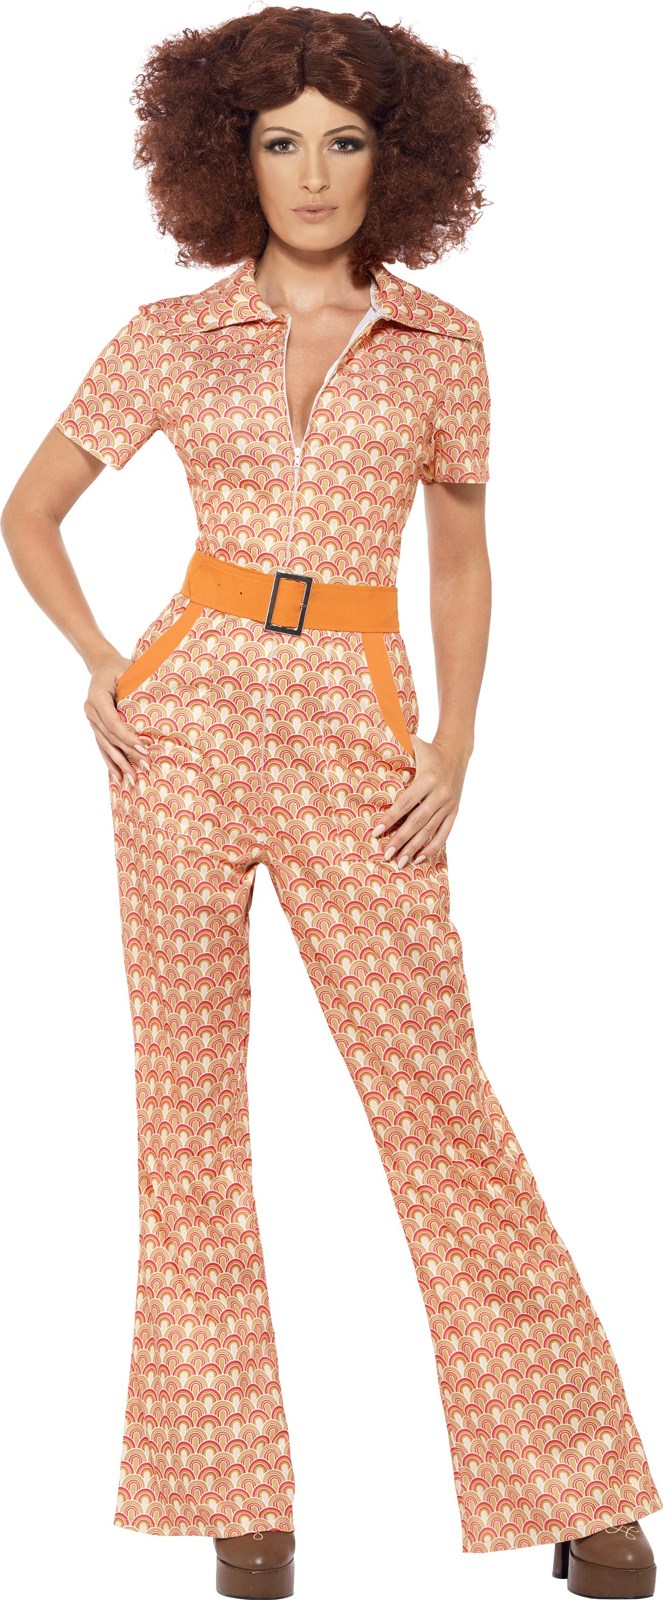 Authentic 70s Chic Costume For Women